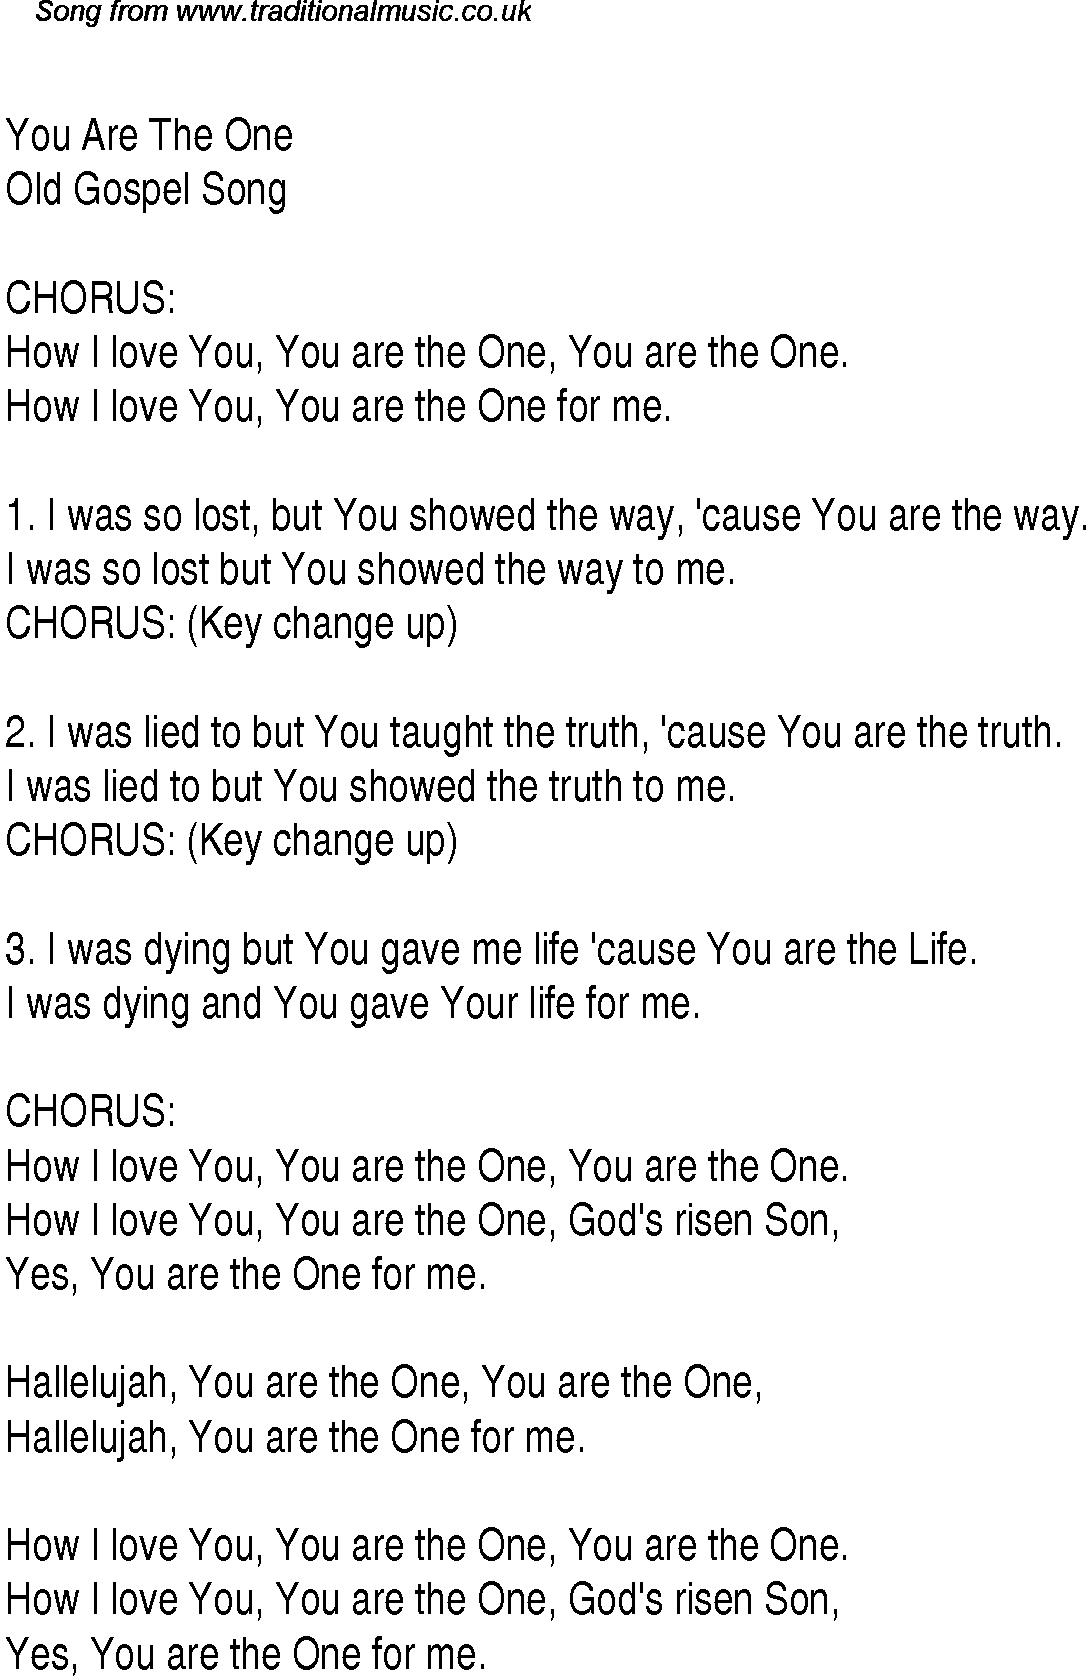 Gospel Song: you-are-the-one, lyrics and chords.